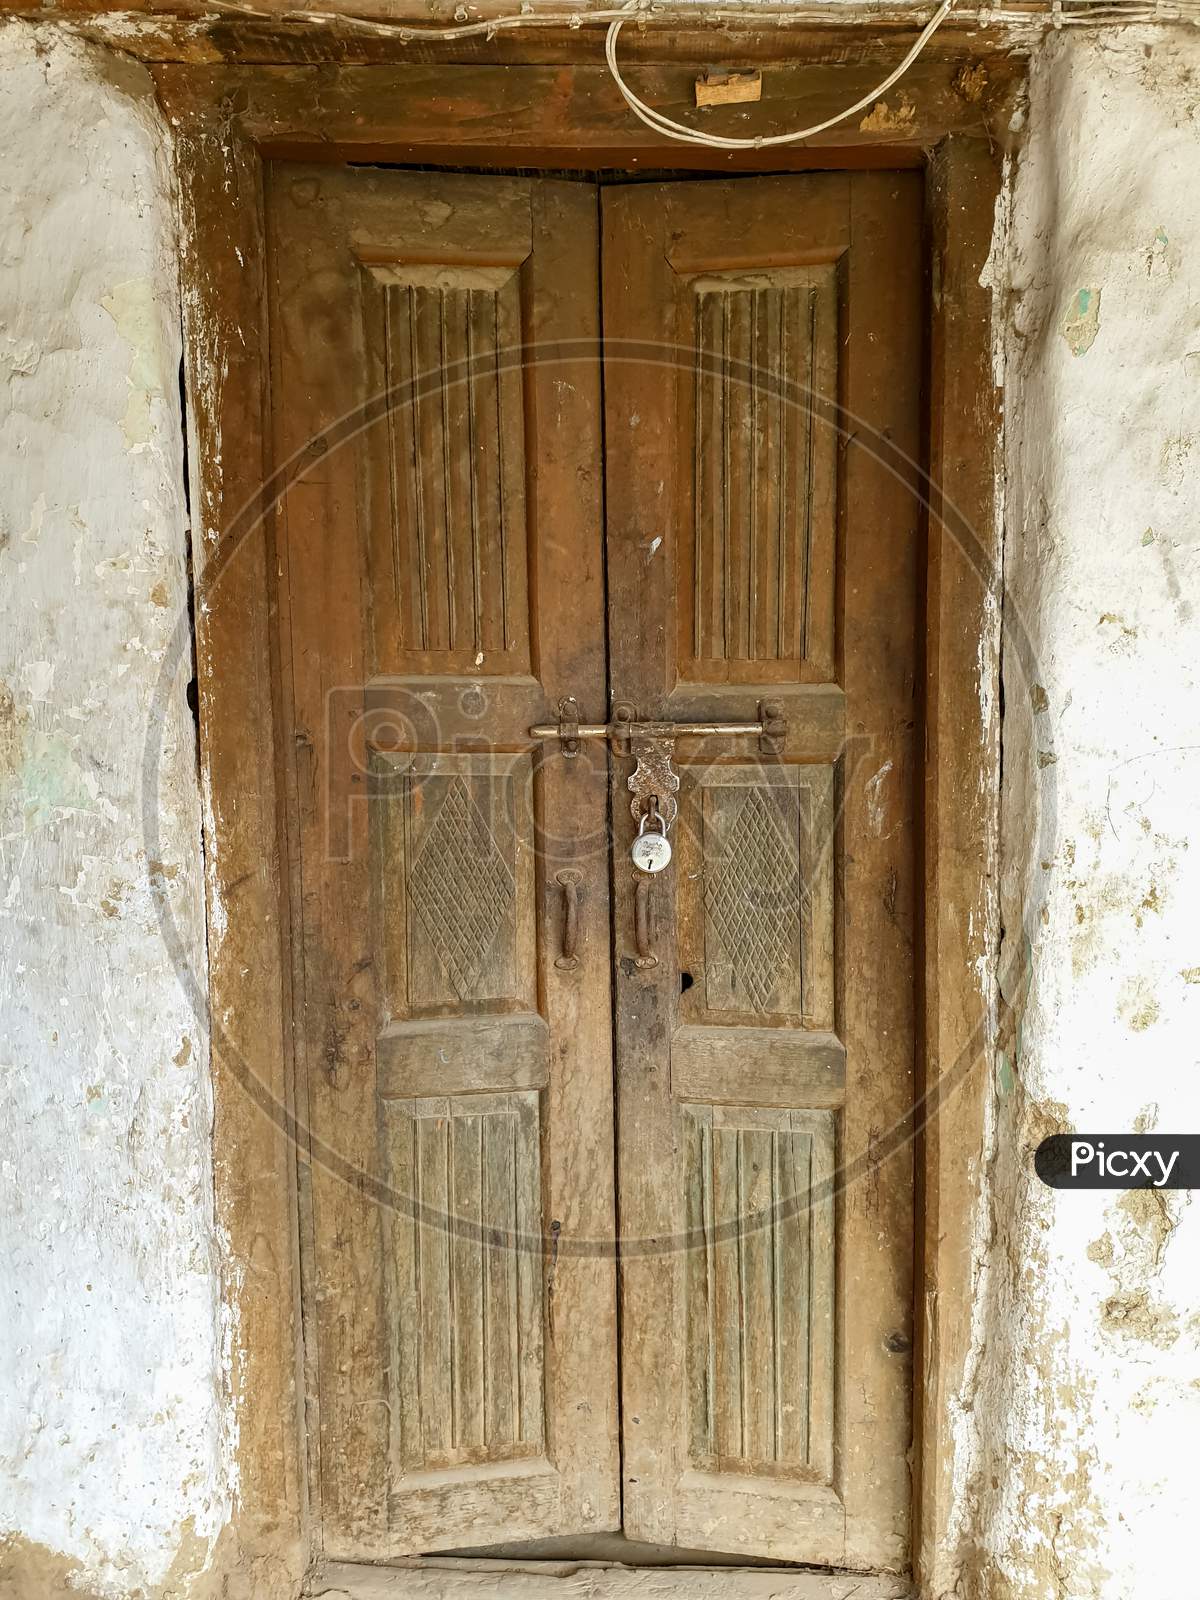 Photo of wooden door of old Indian house in hilly area of Himachal Pradesh, India